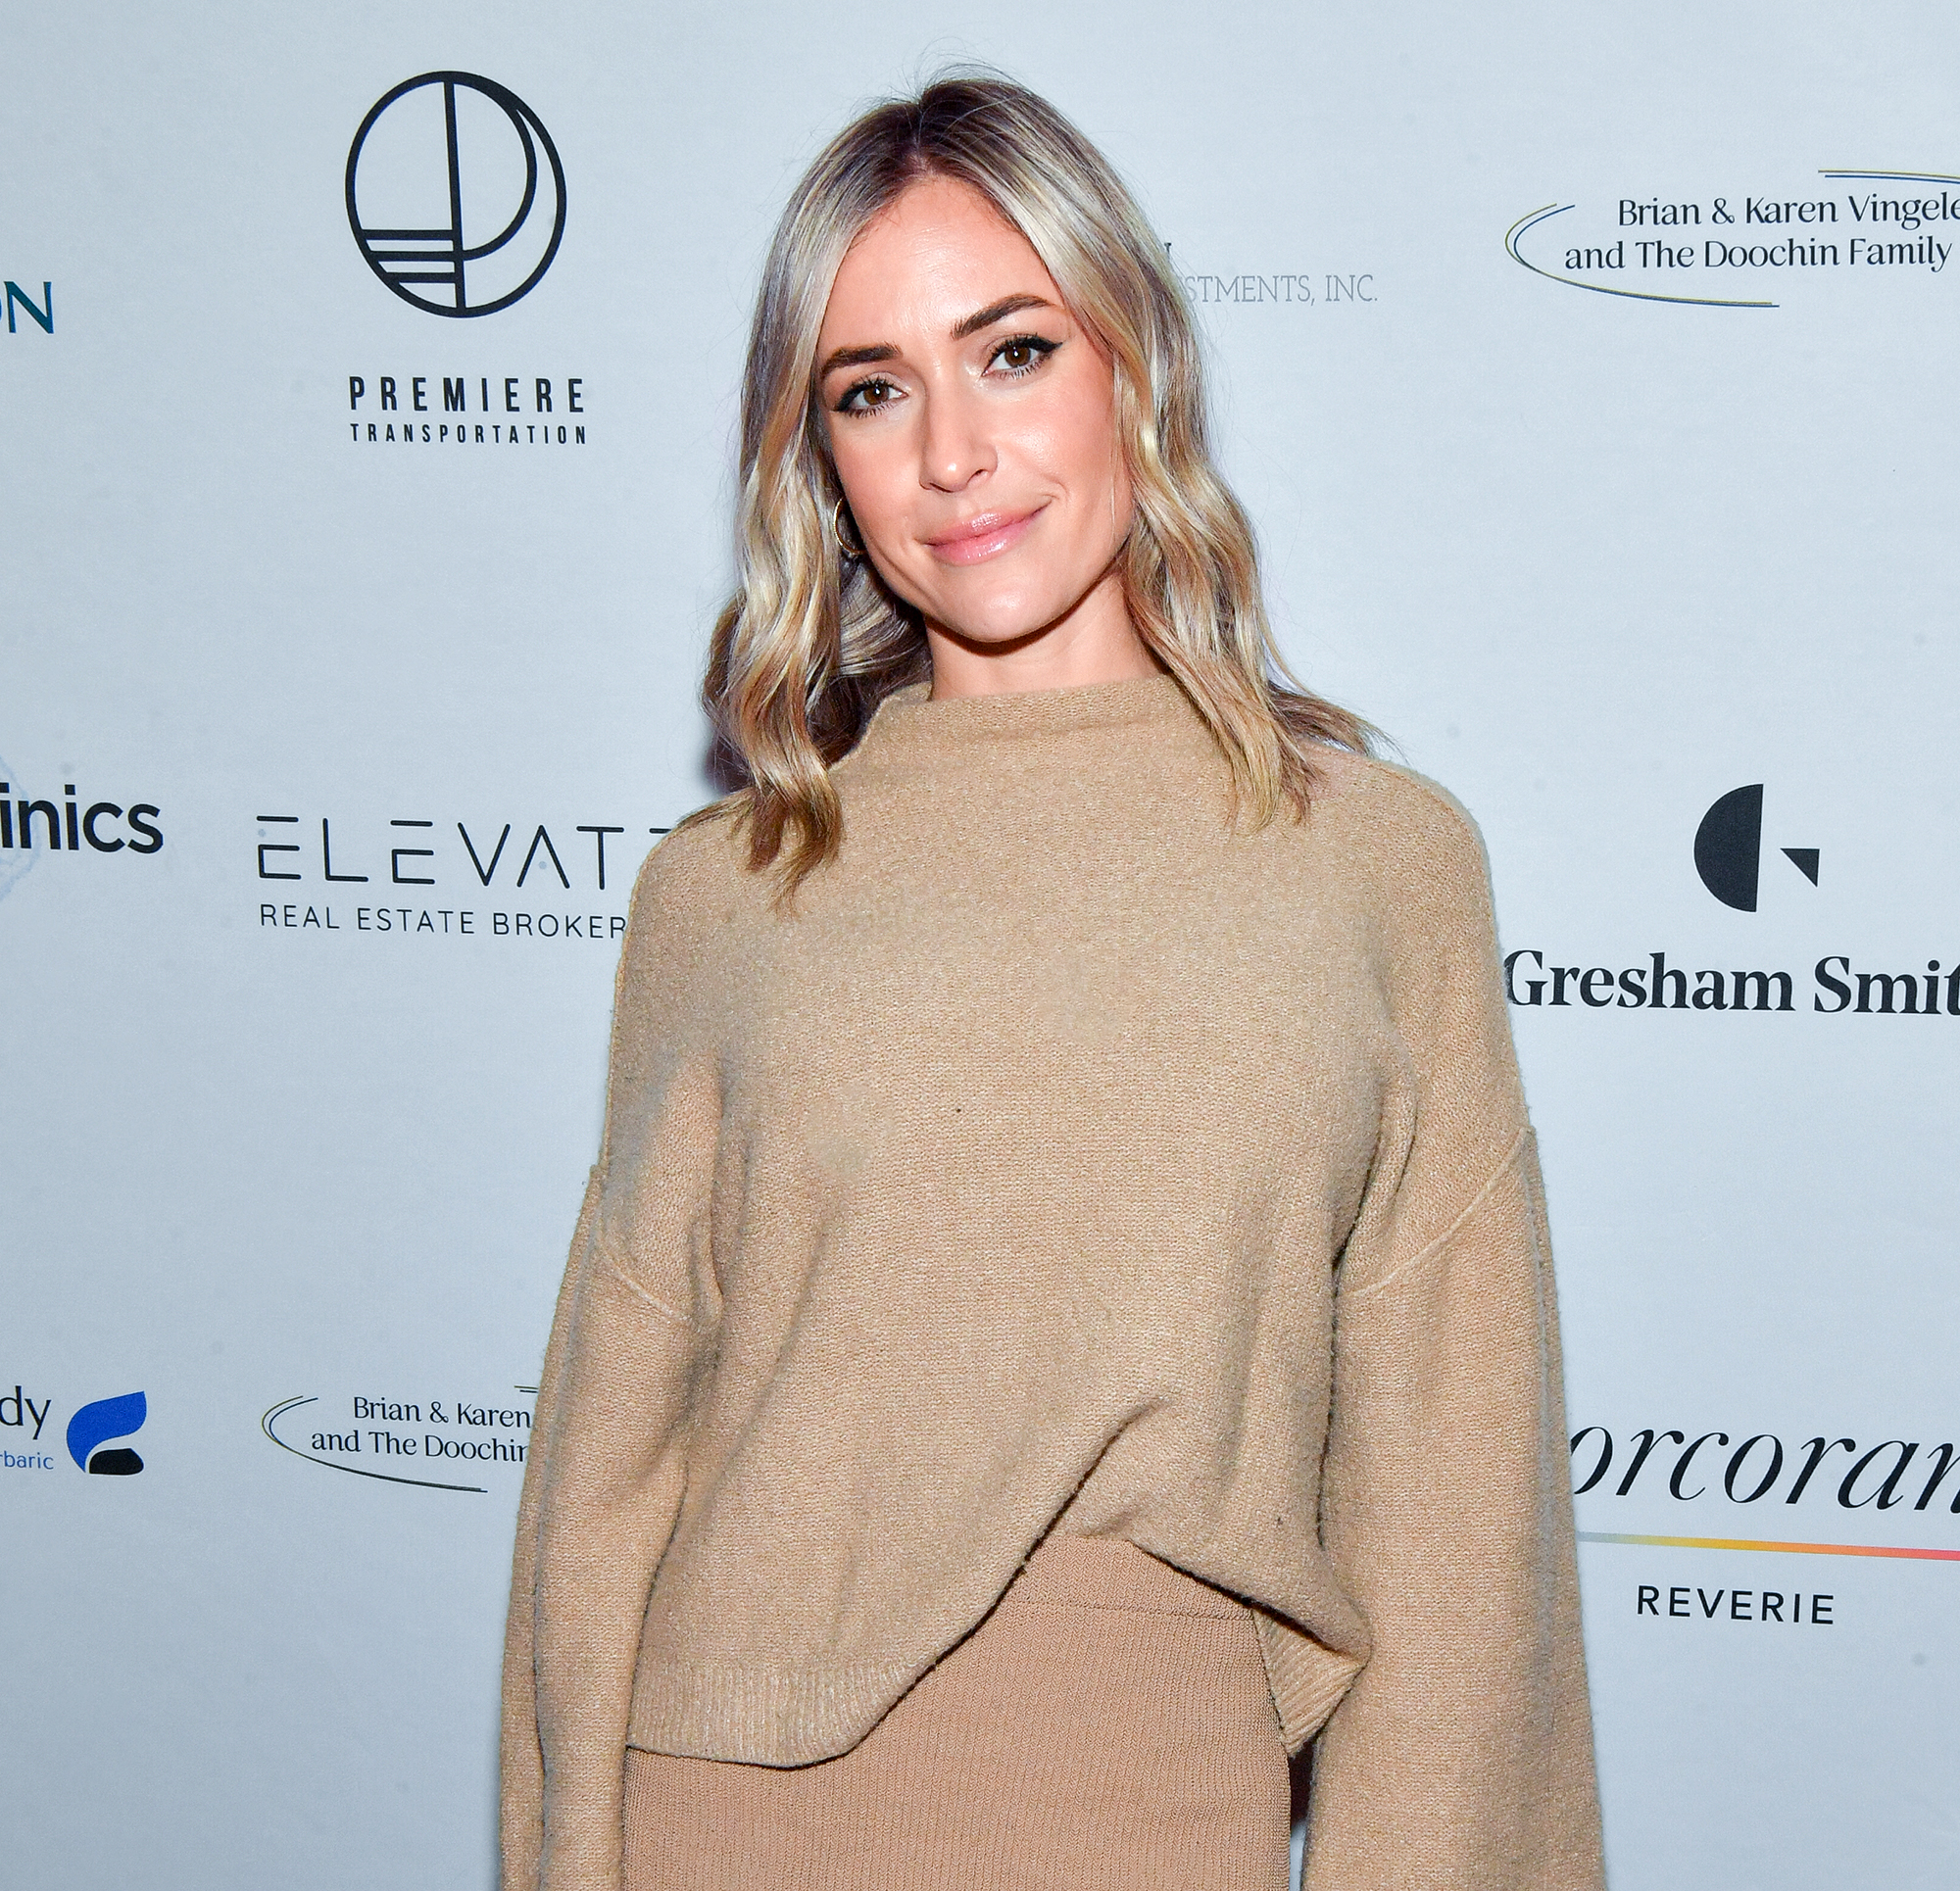 Kristin Cavallari's Inner Circle Can See Her 'Genuine Connection' With Mark Estes- Source